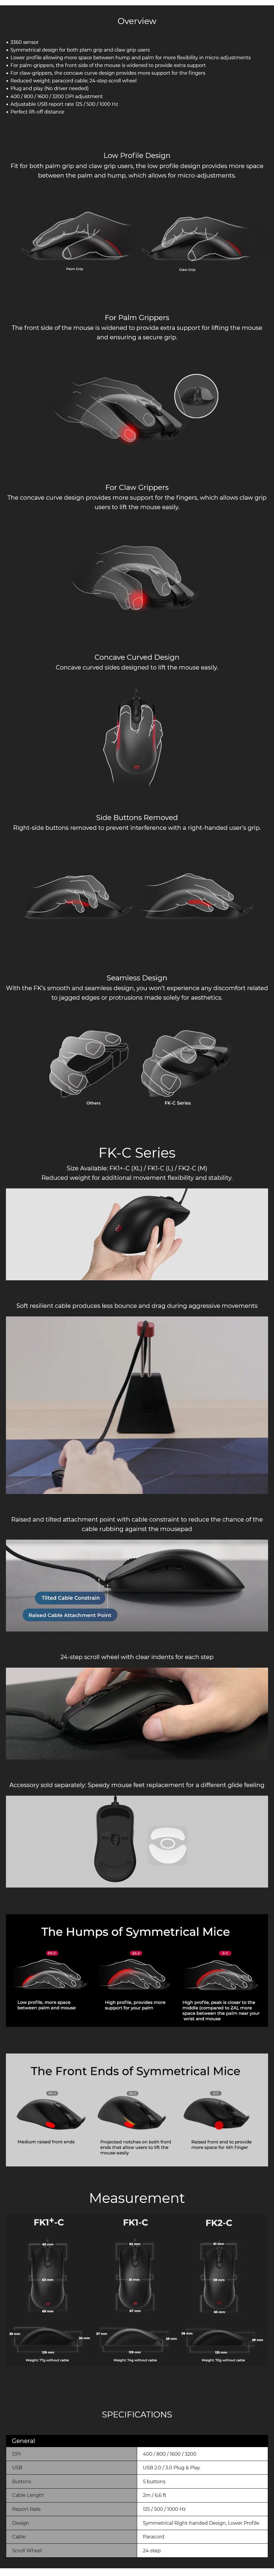 A large marketing image providing additional information about the product BenQ ZOWIE FK1-C Esports Gaming Mouse - Additional alt info not provided